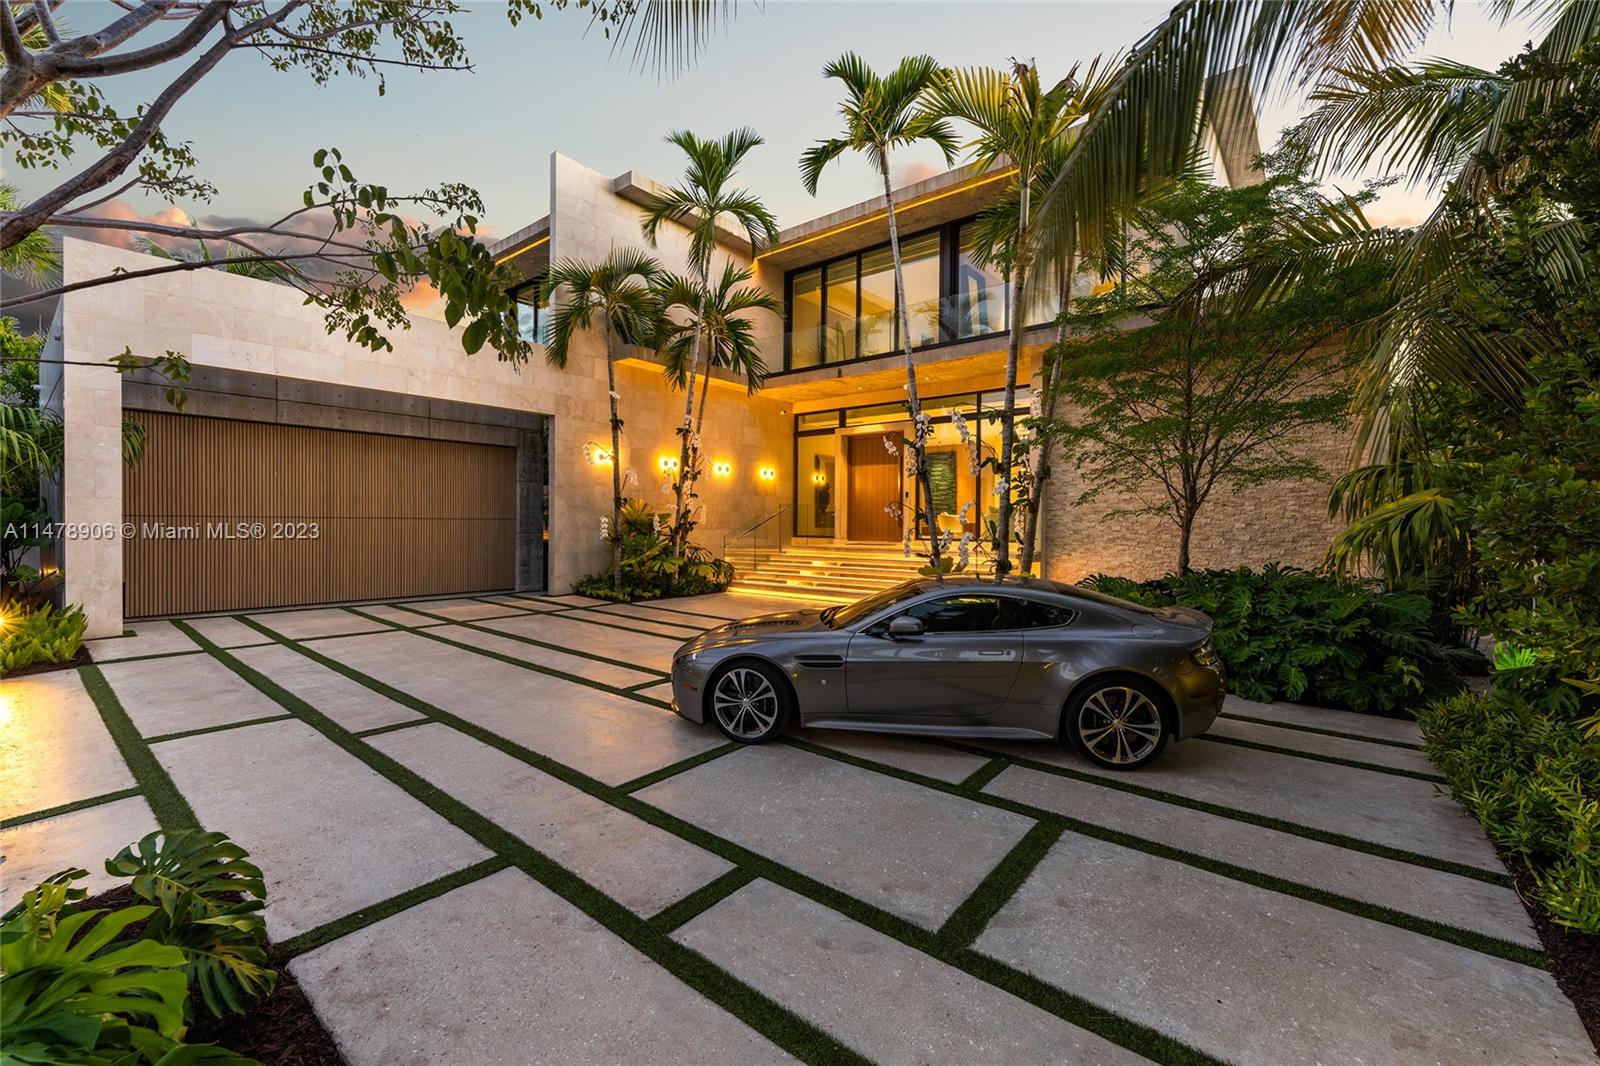 320 S Hibiscus Dr, Miami Beach, Florida, 33139, United States, 7 Bedrooms Bedrooms, ,8 BathroomsBathrooms,Residential,For Sale,320 S Hibiscus Dr,1395276